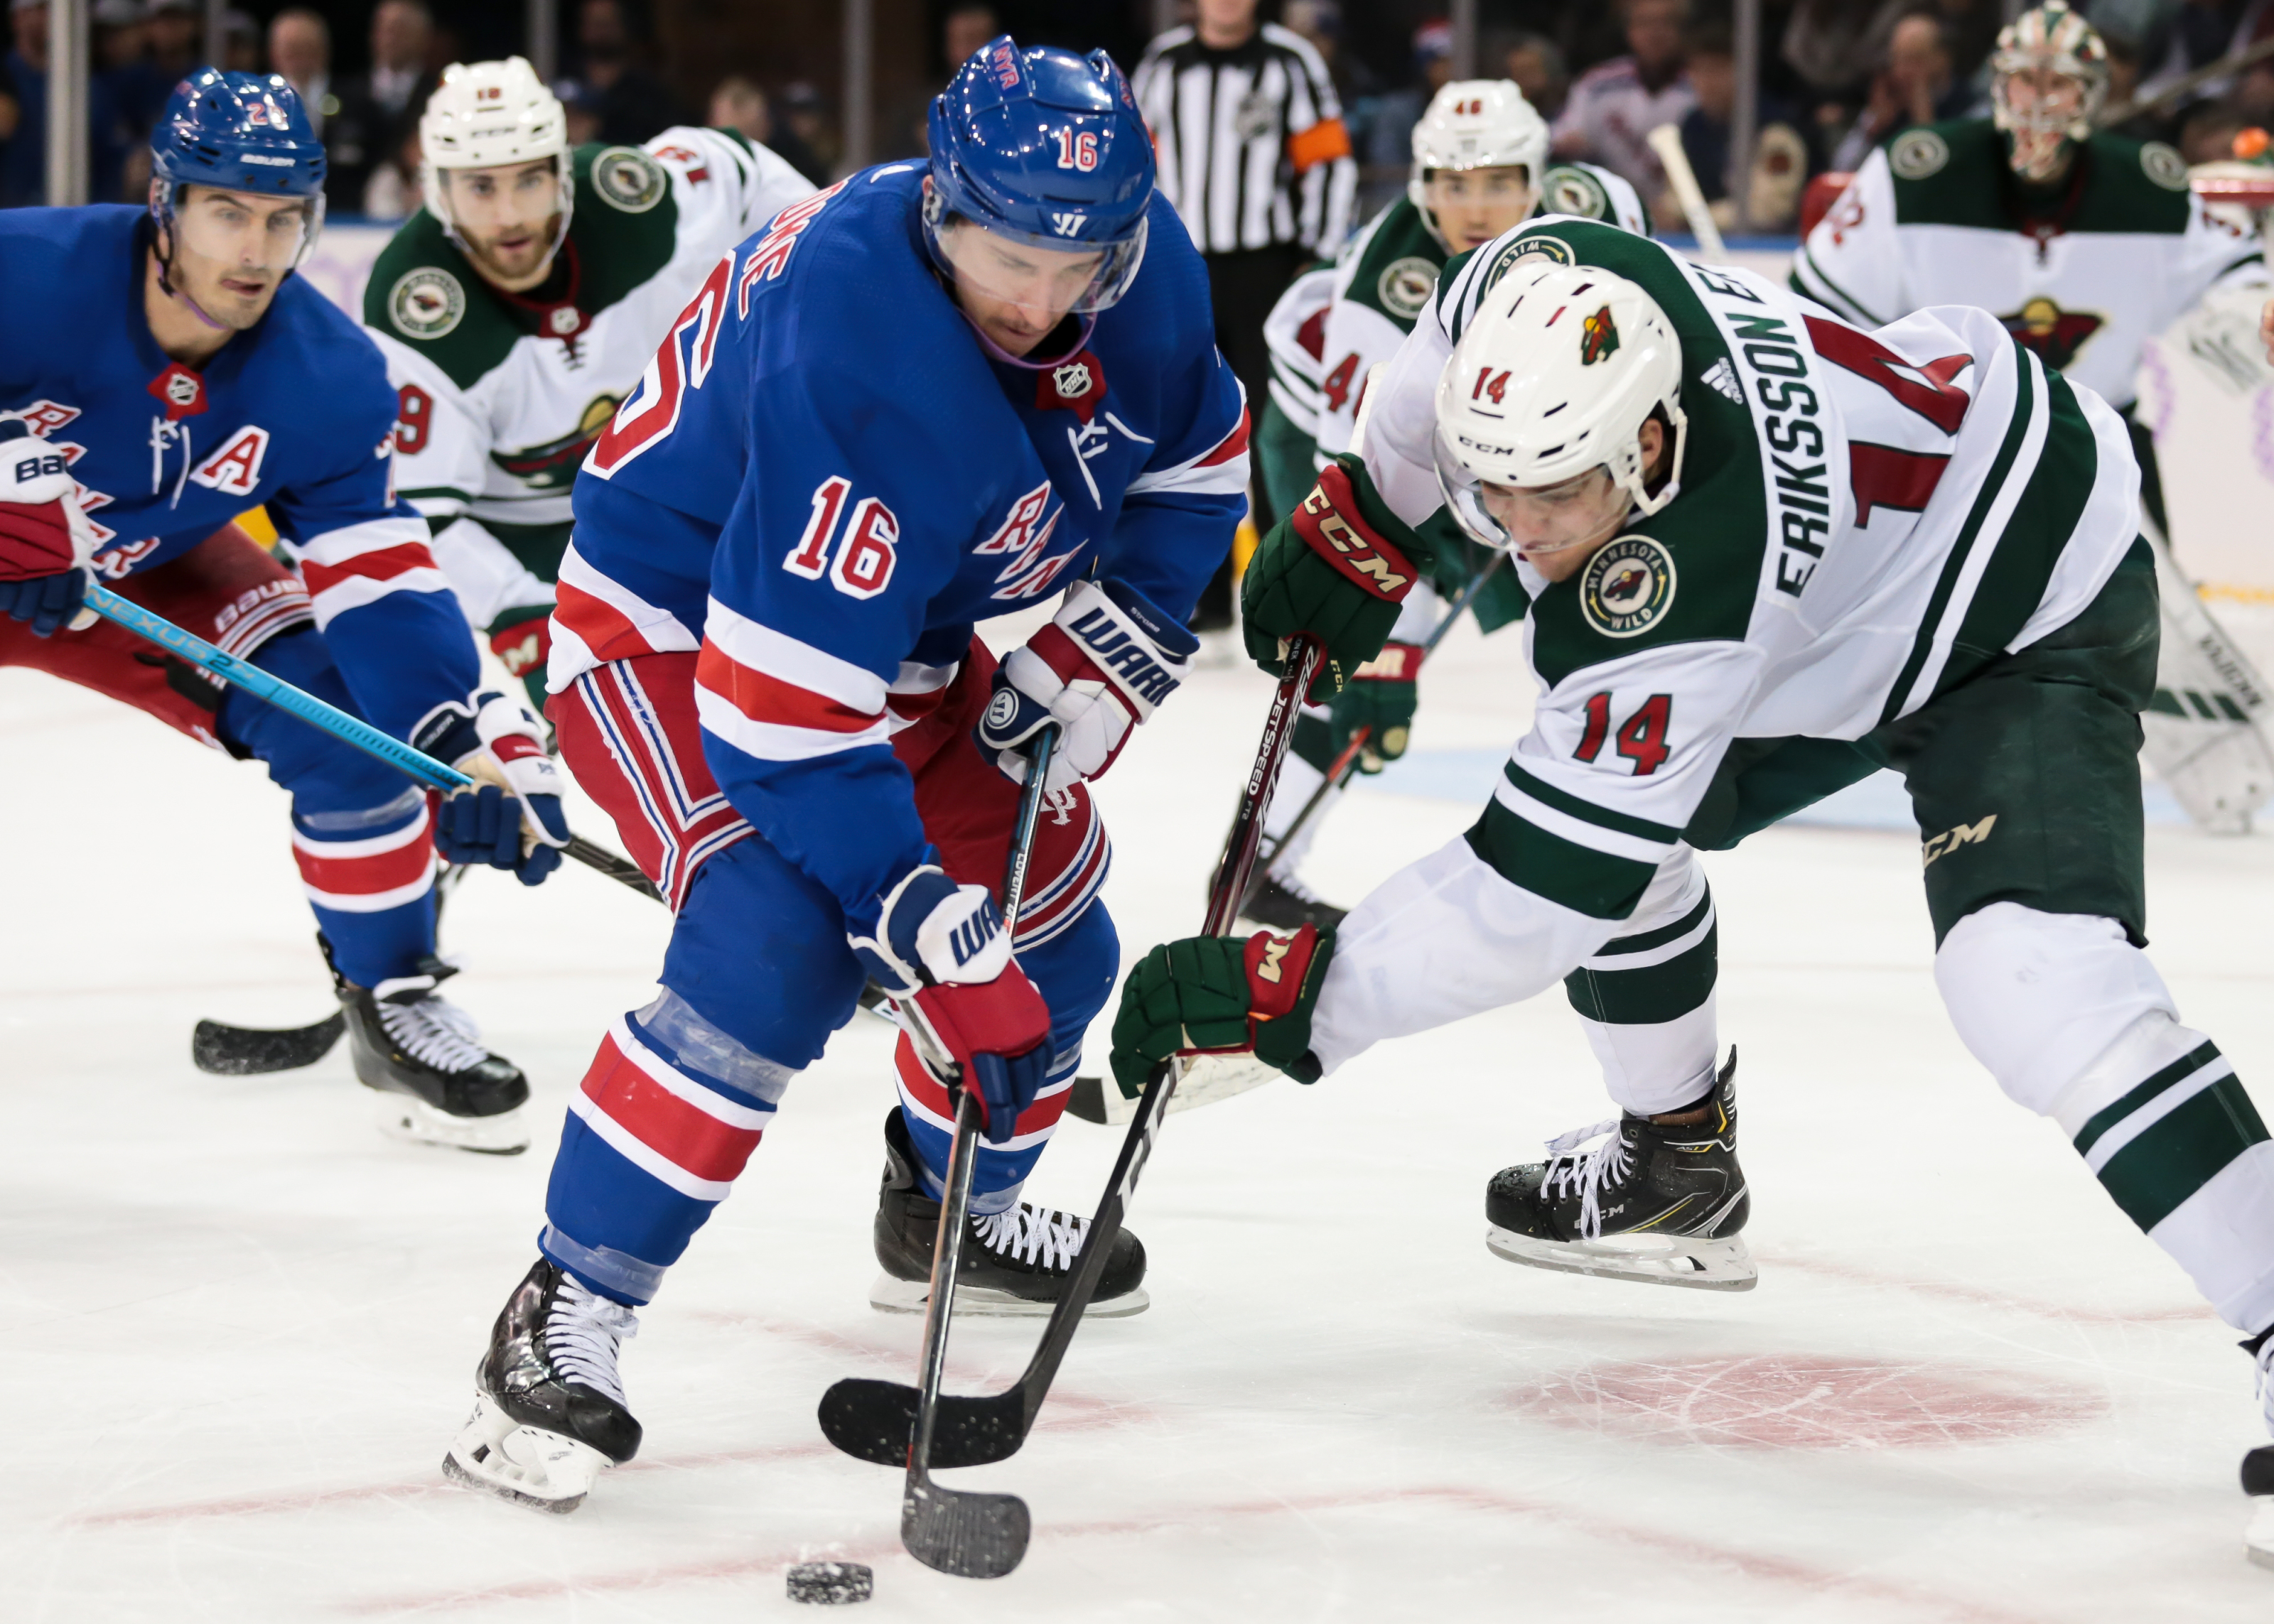 New York Rangers looking for another wild night in Minnesota